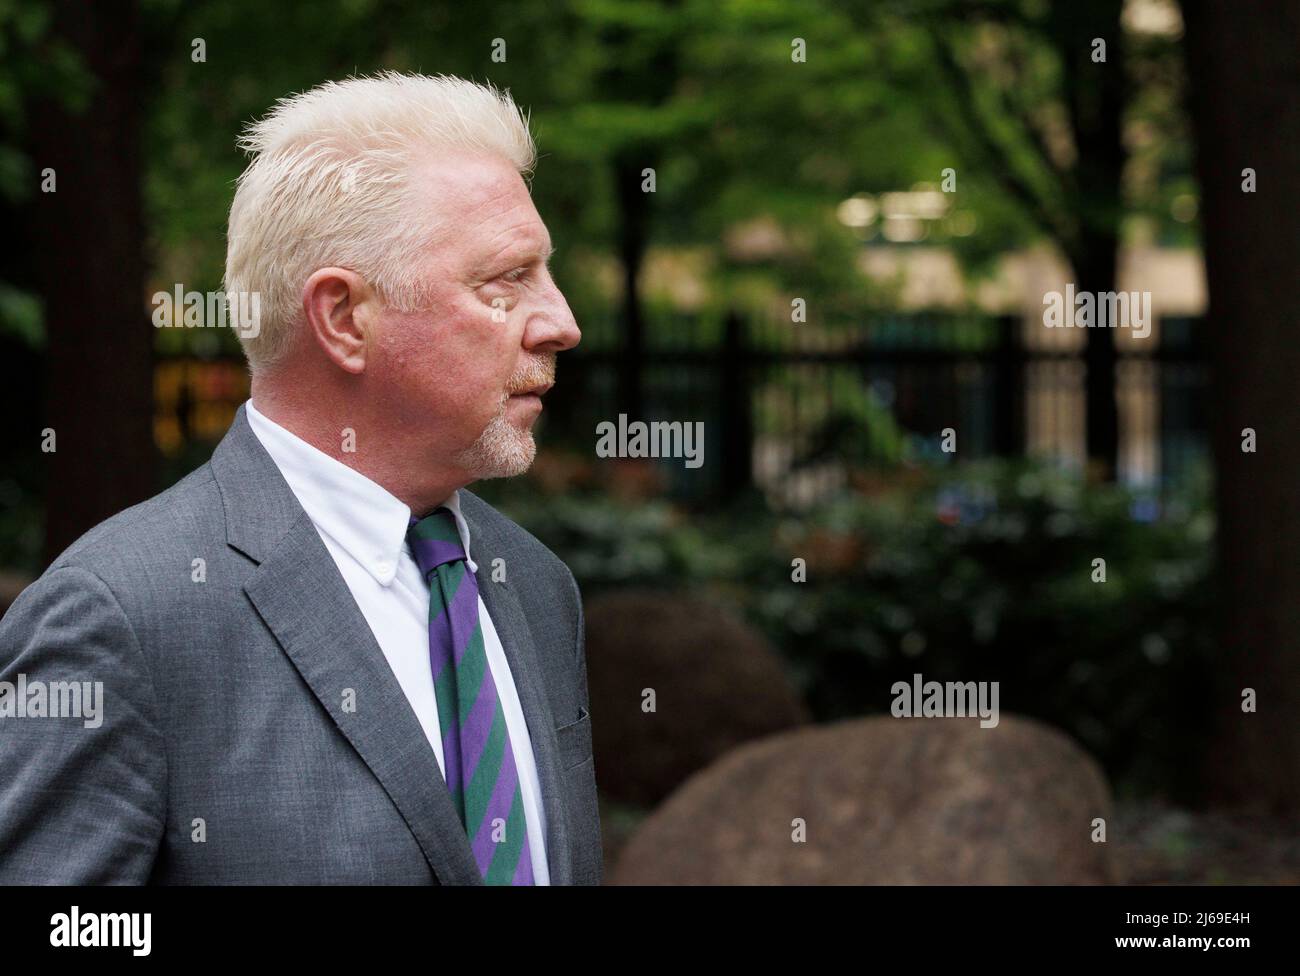 London, UK 29 Apr 2022 Former 3 time Wimbledon champion, Boris Becker,  arrives at Southwark Crown Court with his girlfriend Lilian De Carvalho  Monteiro, for sentencing in his Insolvency case. He is